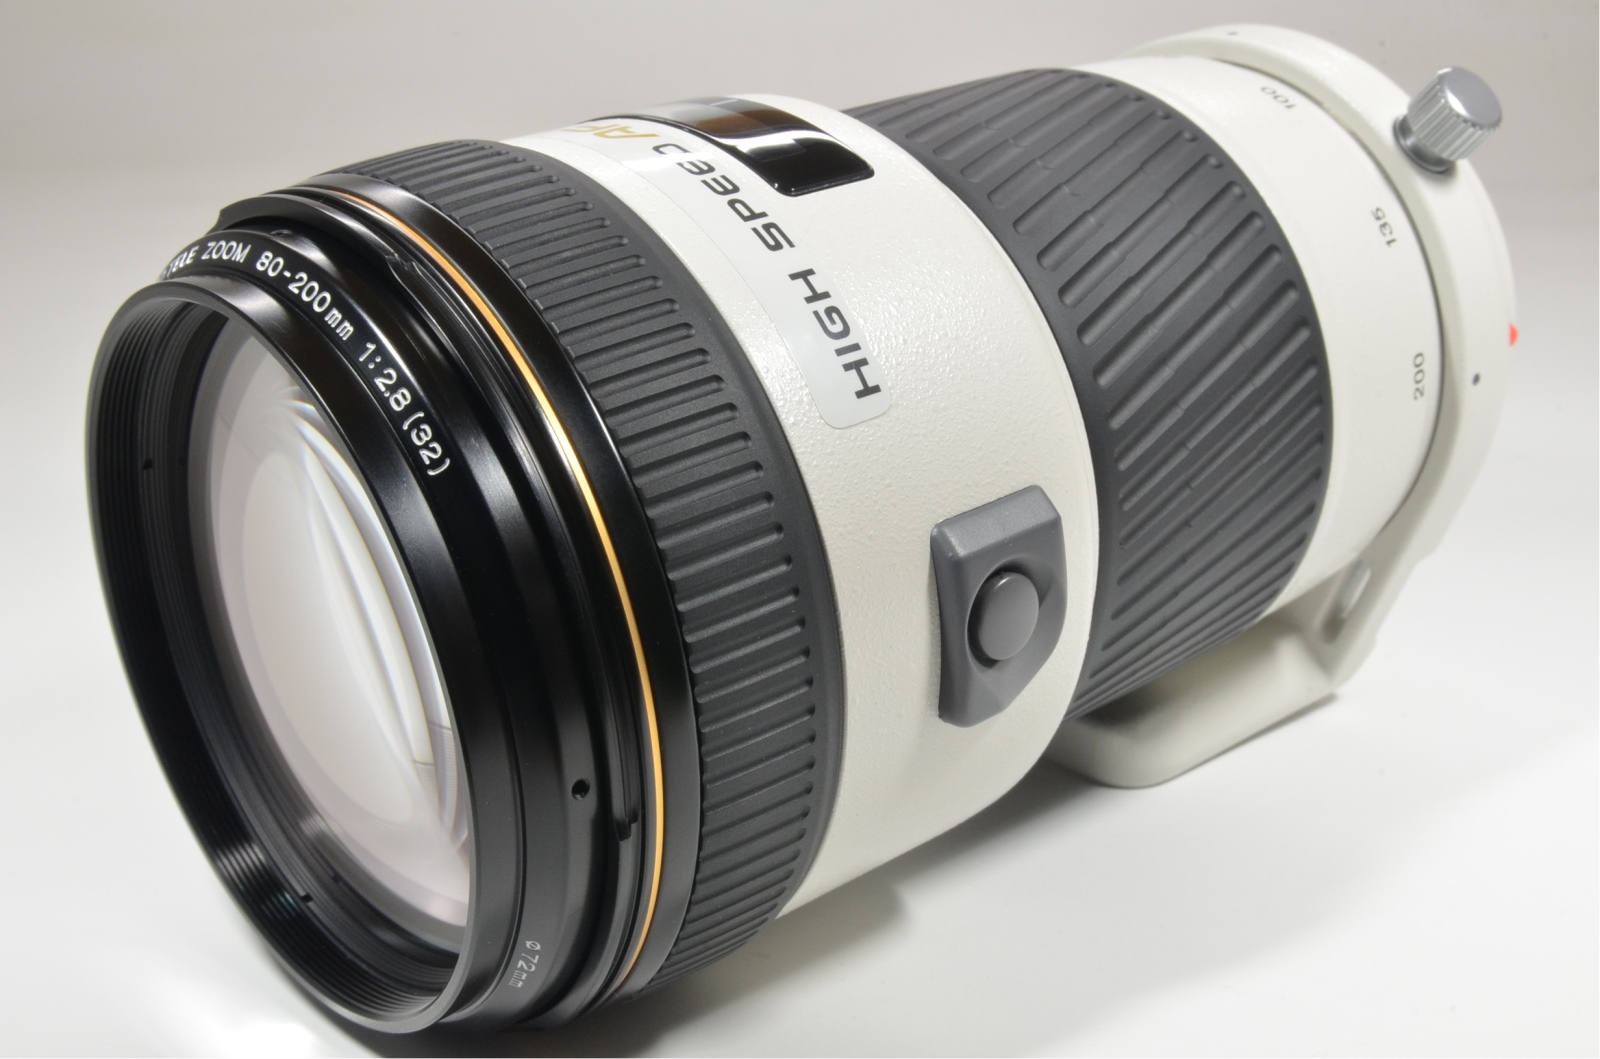 minolta high speed af apo 80-200mm f2.8 g with close-up lens sony